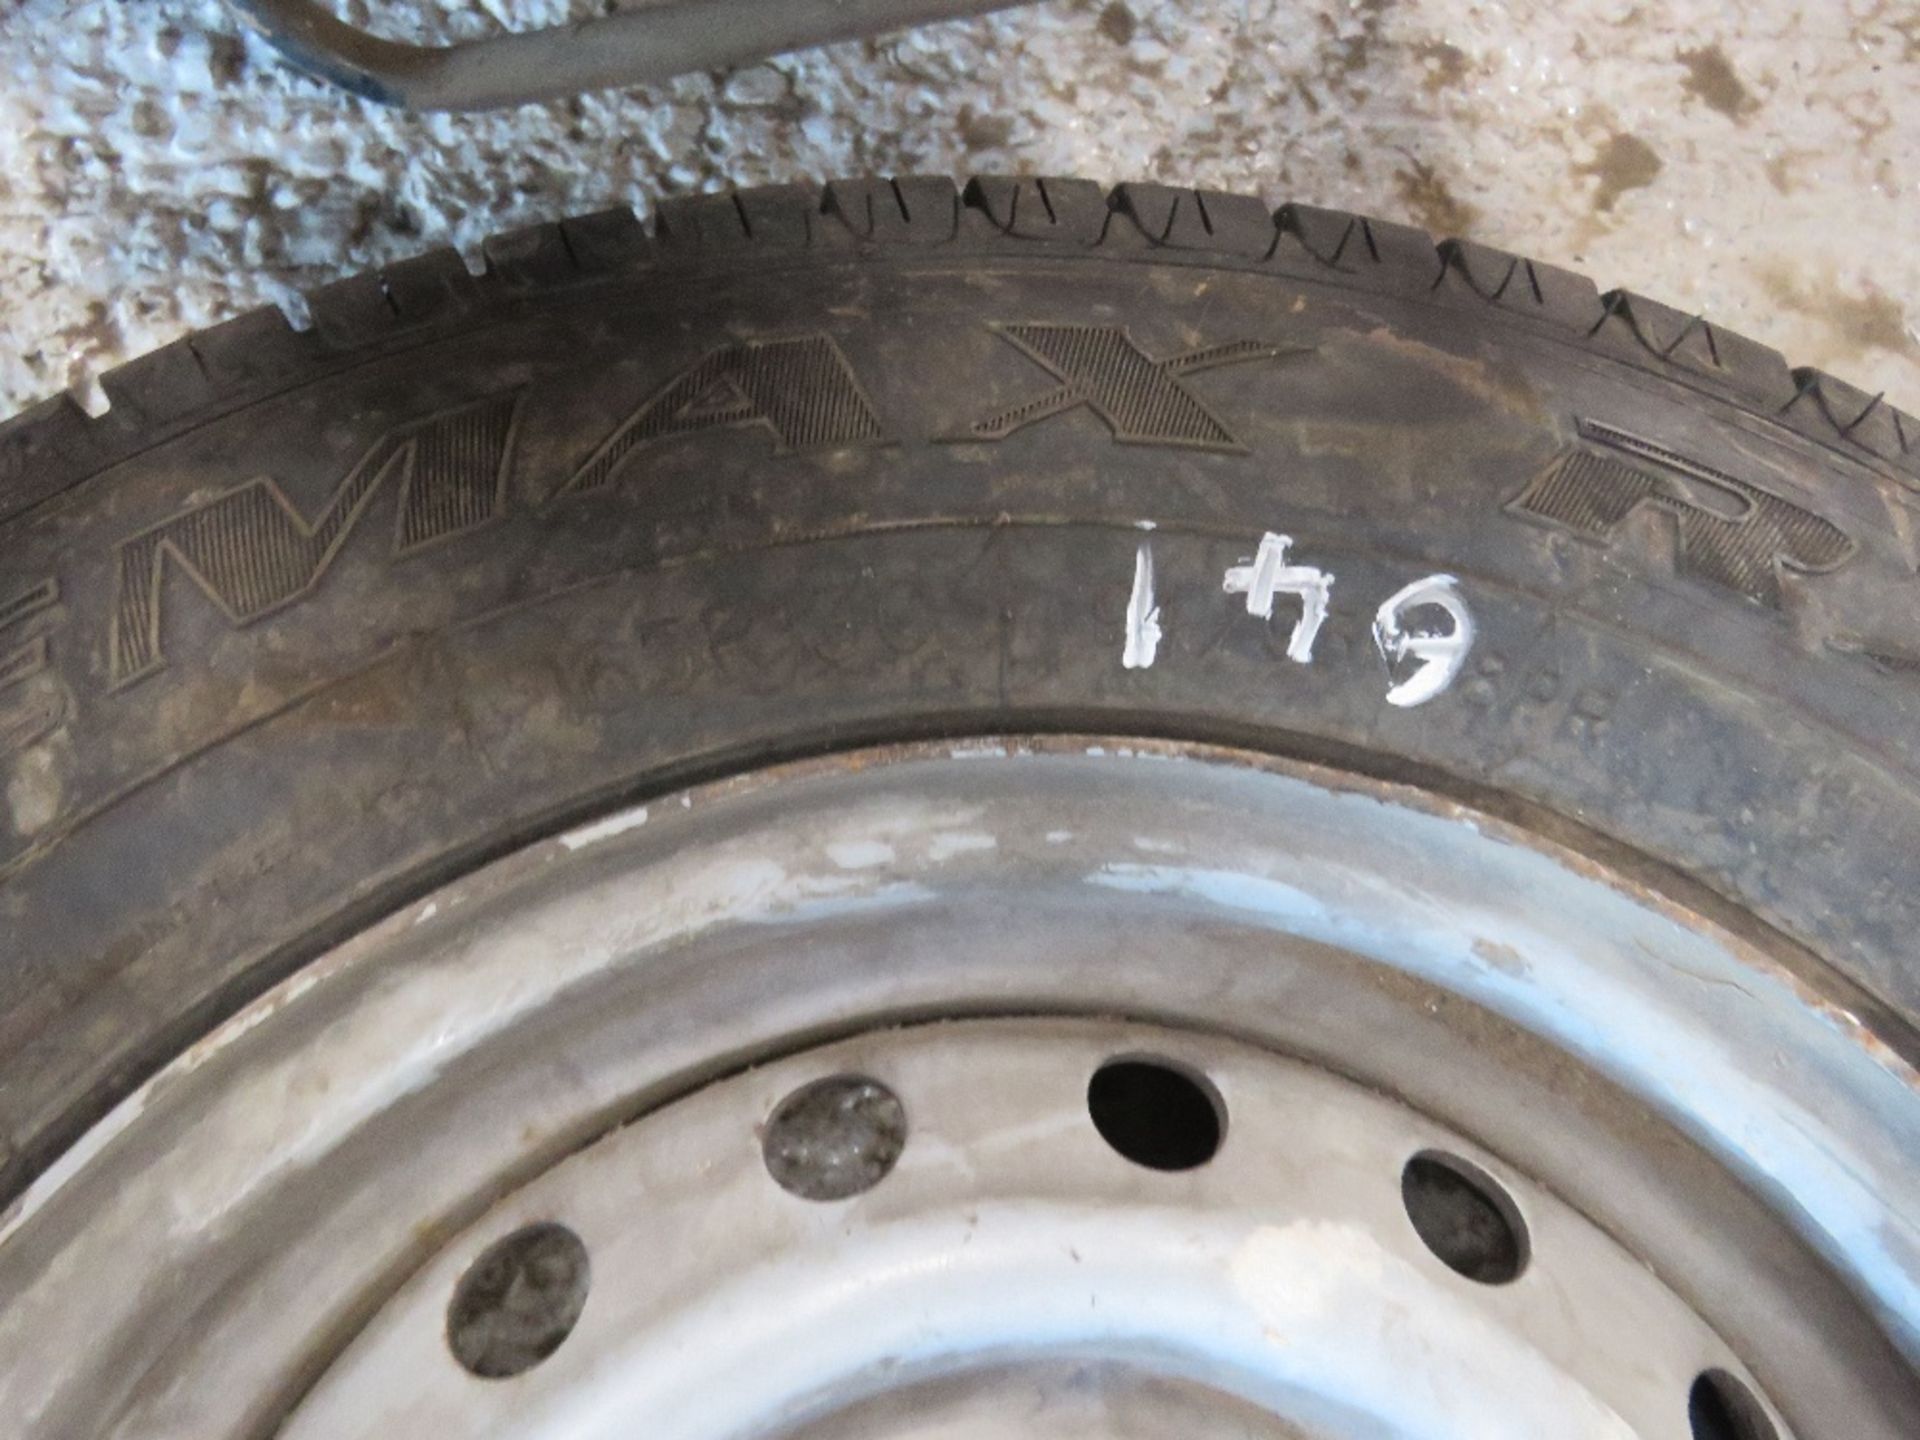 2 X TRAILER WHEELS 165R130. SOURCED FROM DEPOT CLOSURE. - Image 4 of 5